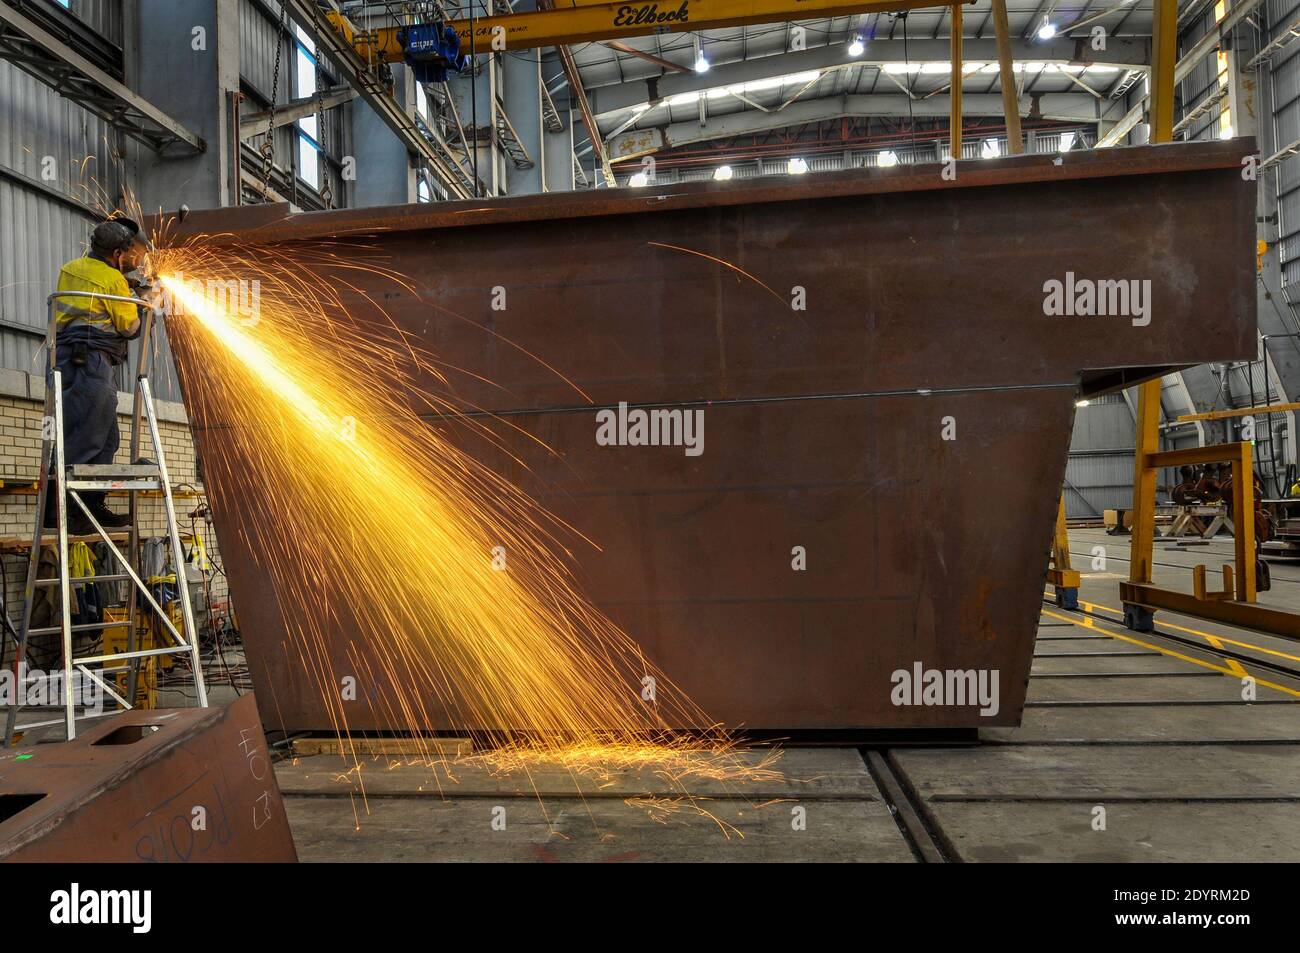 Man welding a metal structure, with a stream of sparks, in an industrial setting. Stock Photo